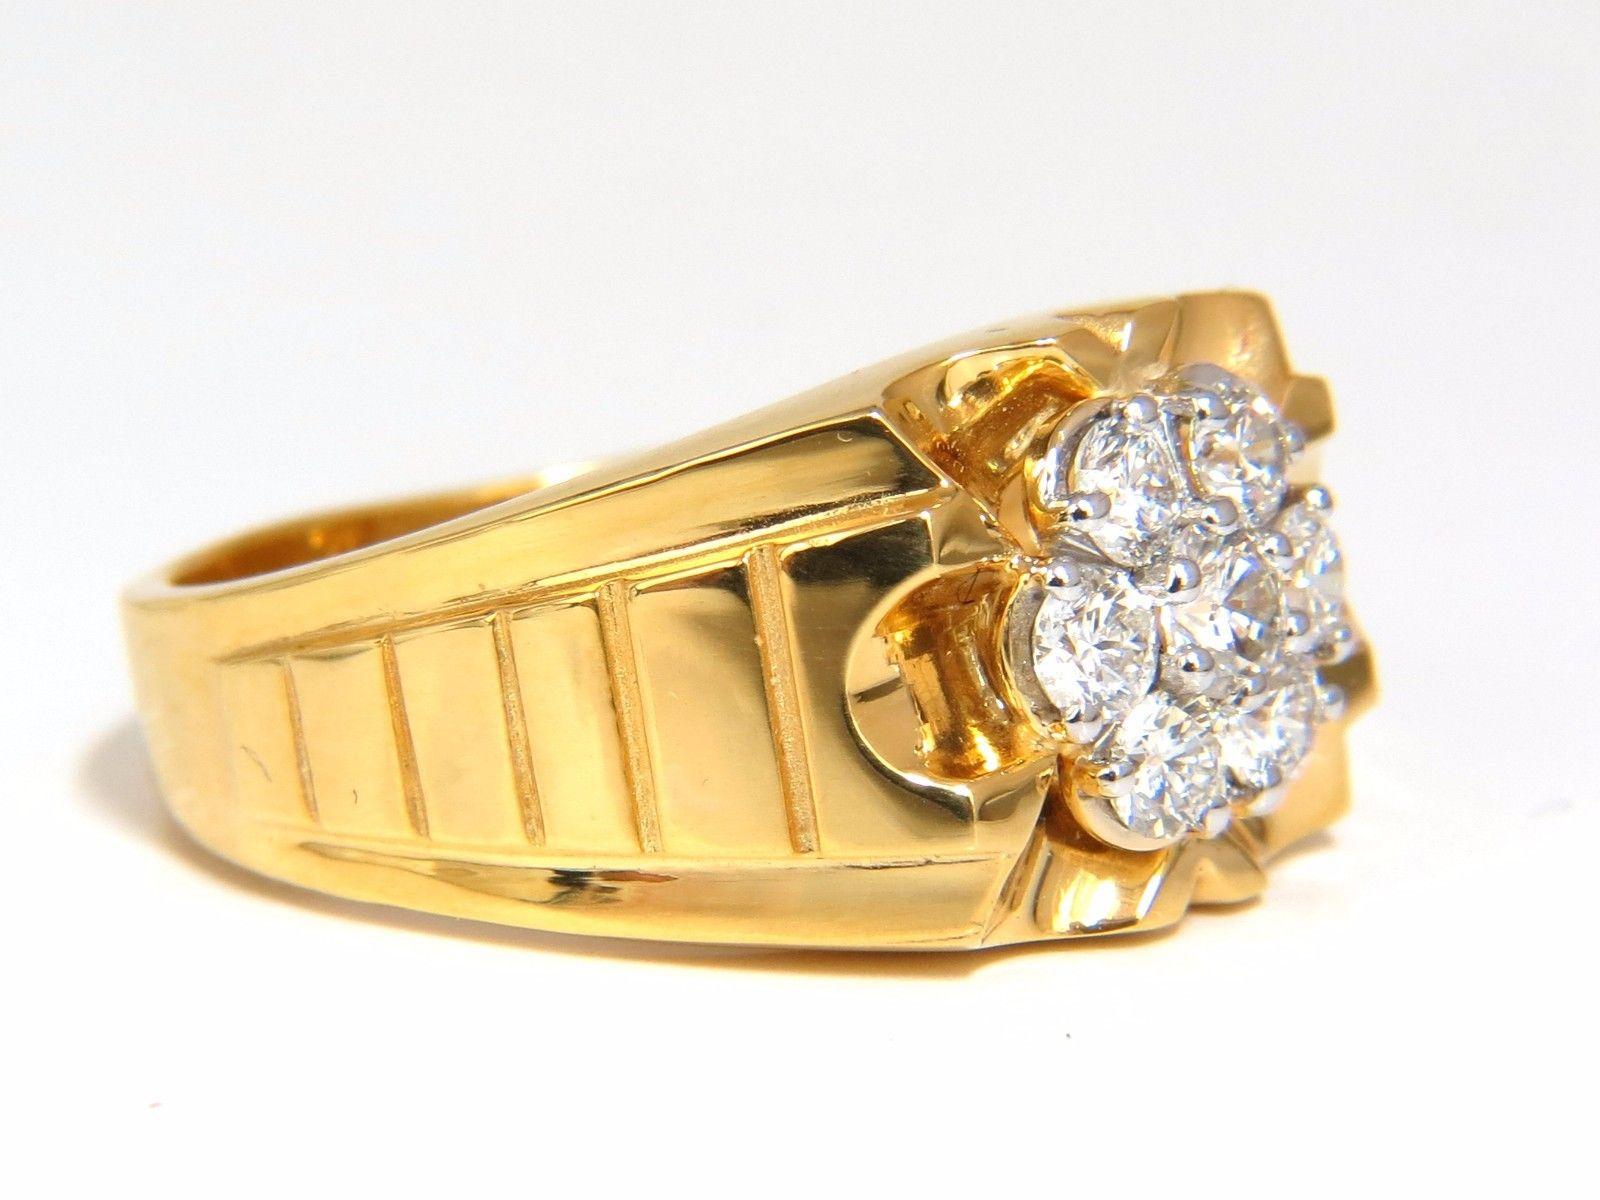 Men's Round cut diamonds wide band.

1.00ct. natural rounds cuts, prong set.

Vs-2 clarity

G-color

Natural, Earth Mined.

18kt. yellow gold.

11.7 grams.

Ring is 12.5mm wide 

current ring size: 

11

We may resize, please inquire

$6000